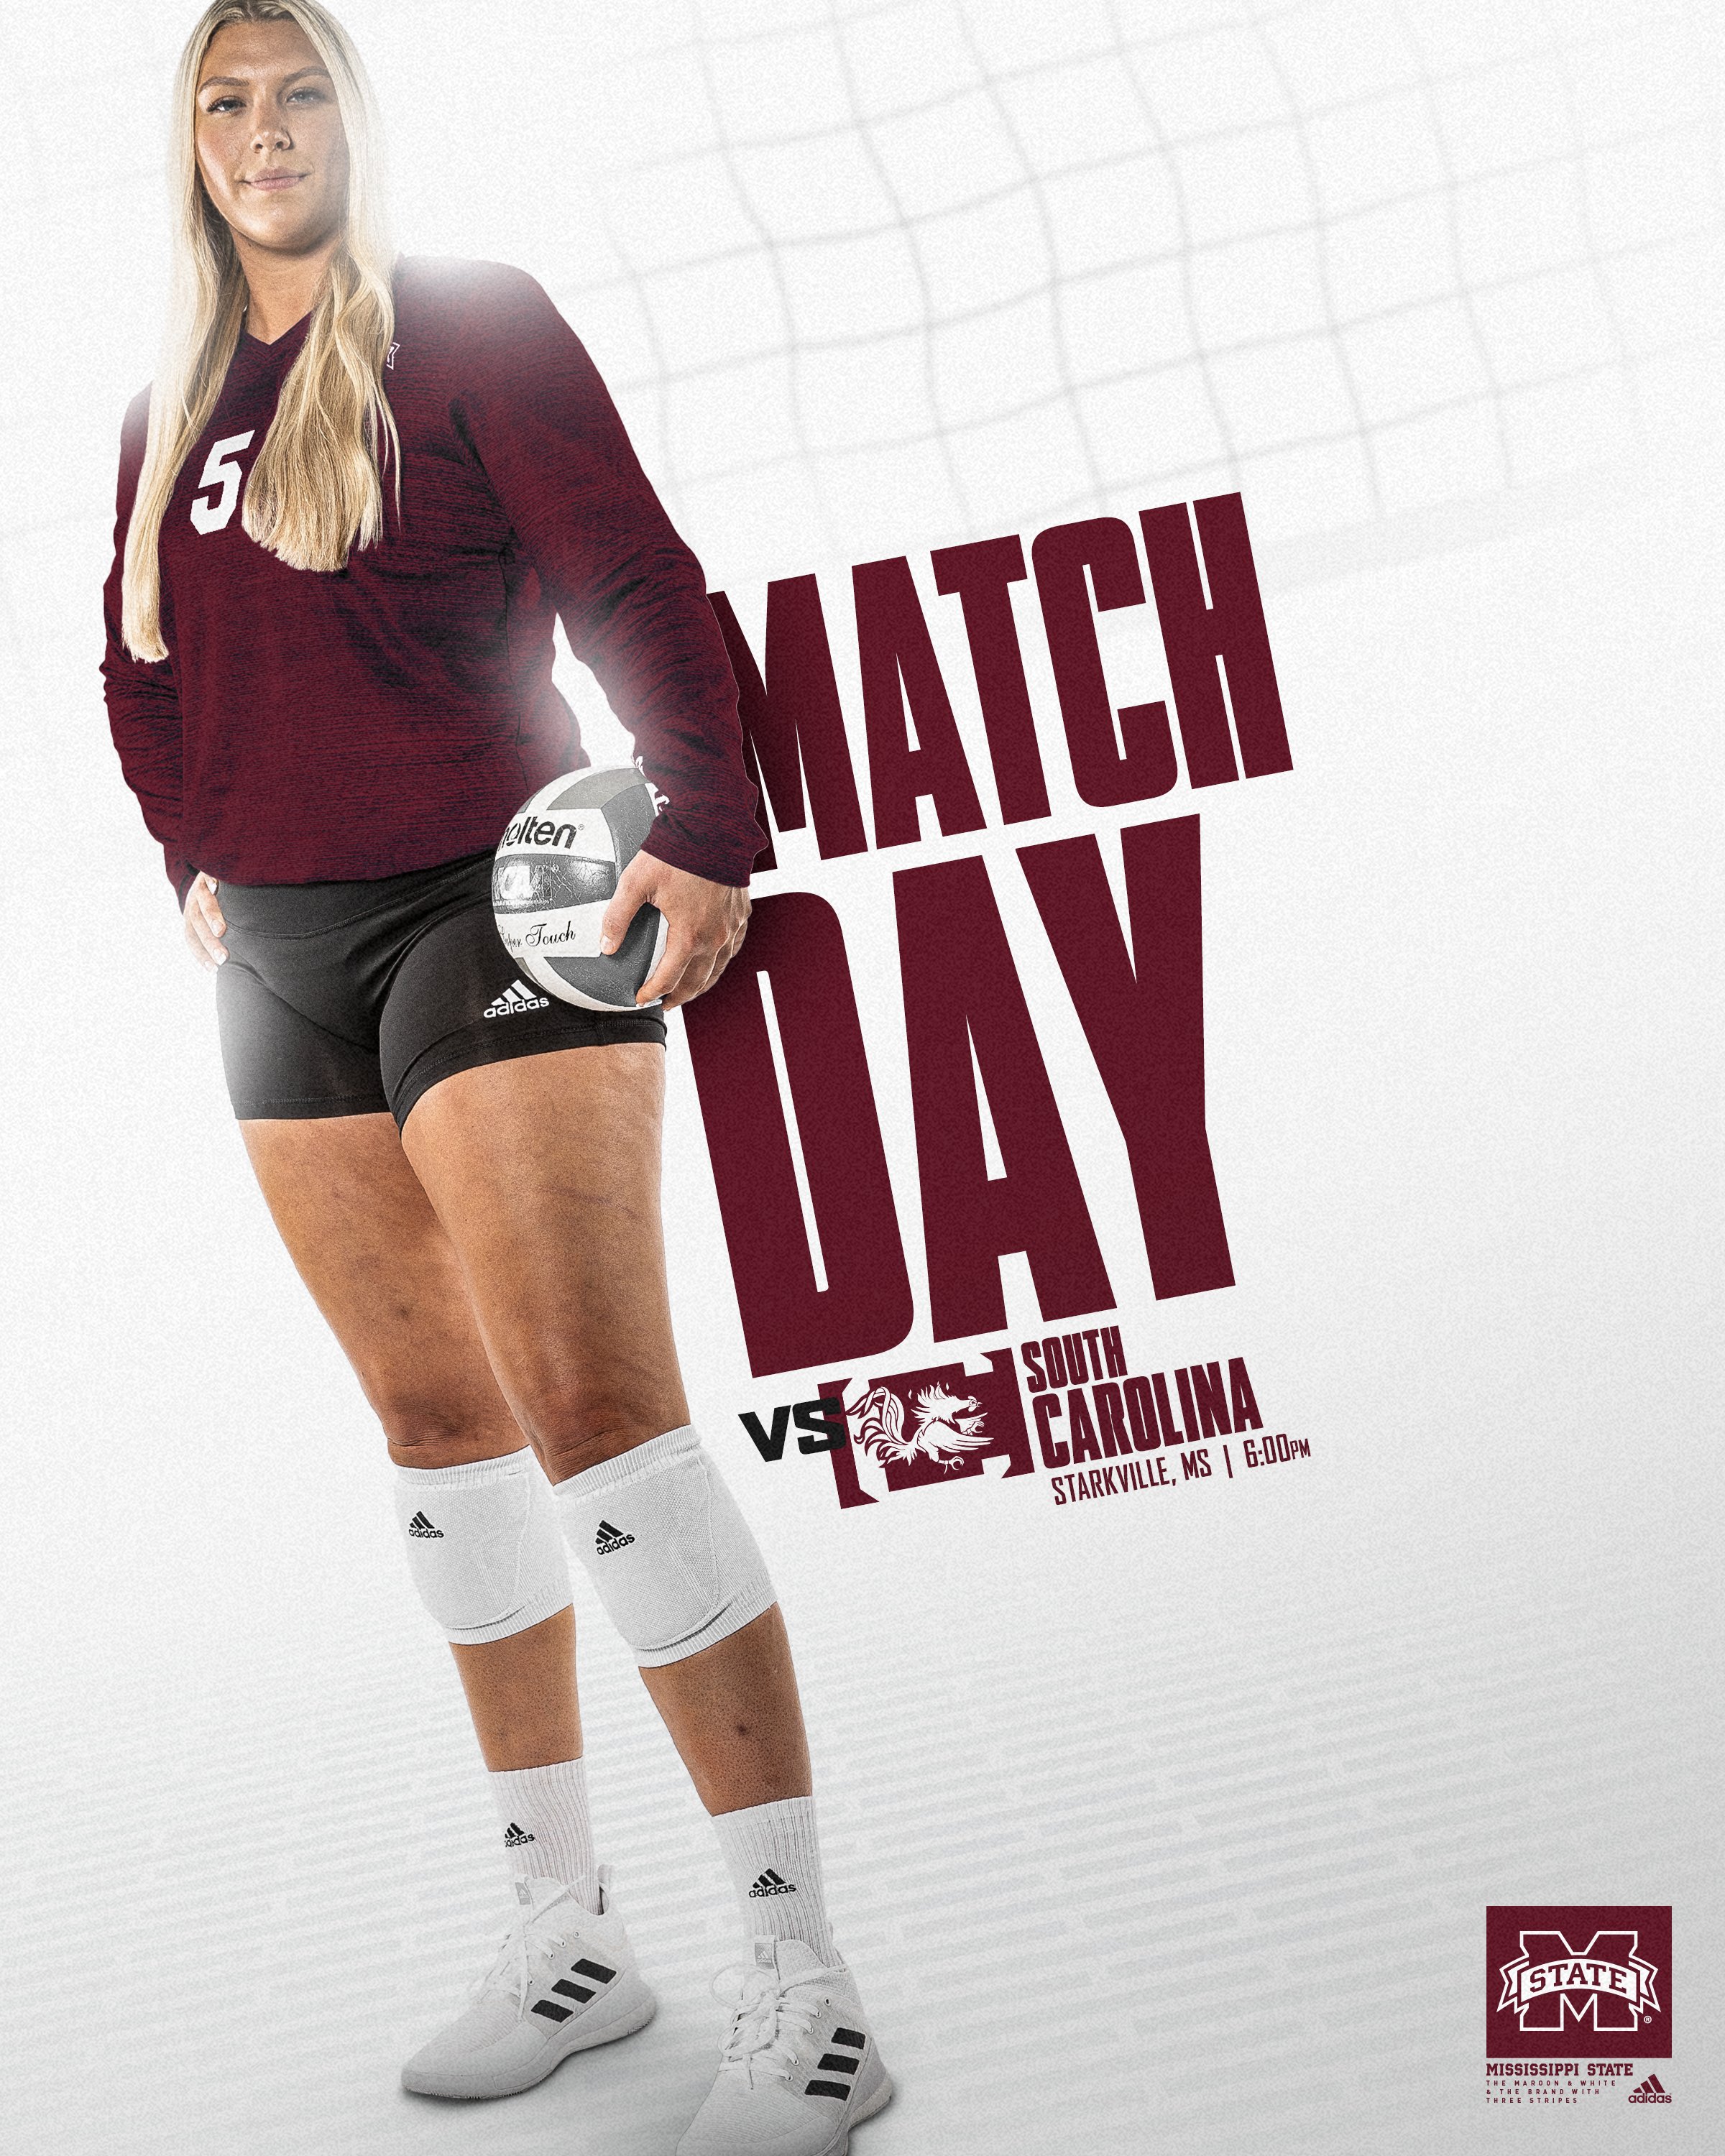 Maroon and white Match Day graphic with an image of MSU volleyball player Jessica Kemp